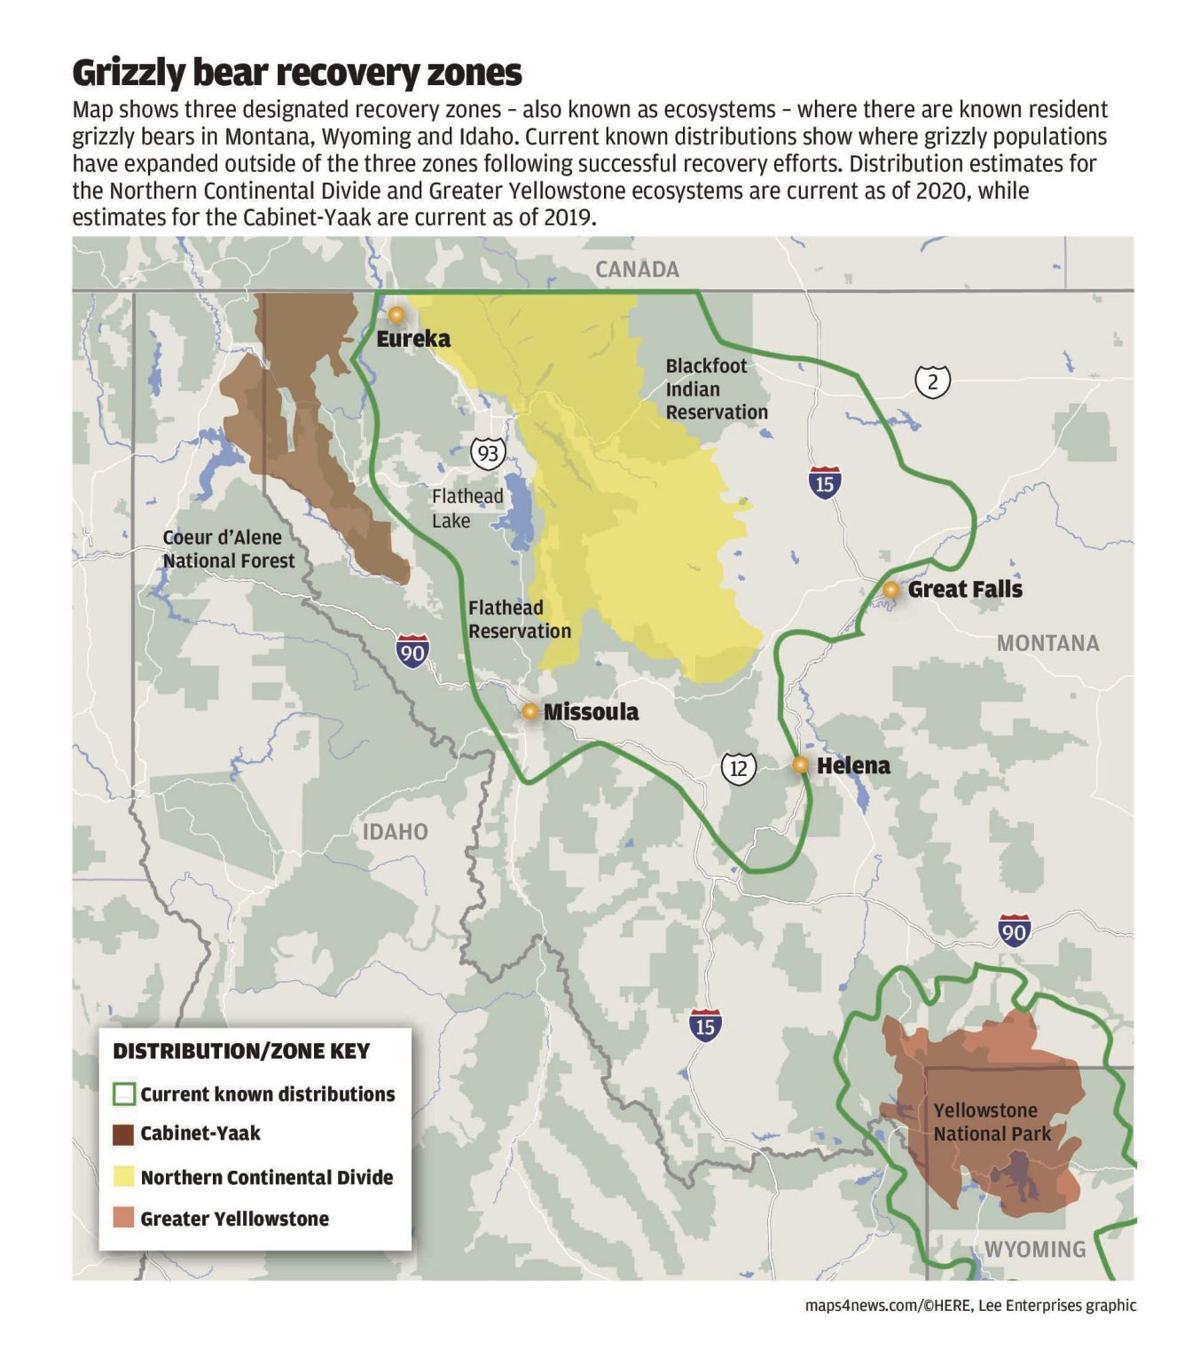 Connecting recovery zones may benefit grizzly populations